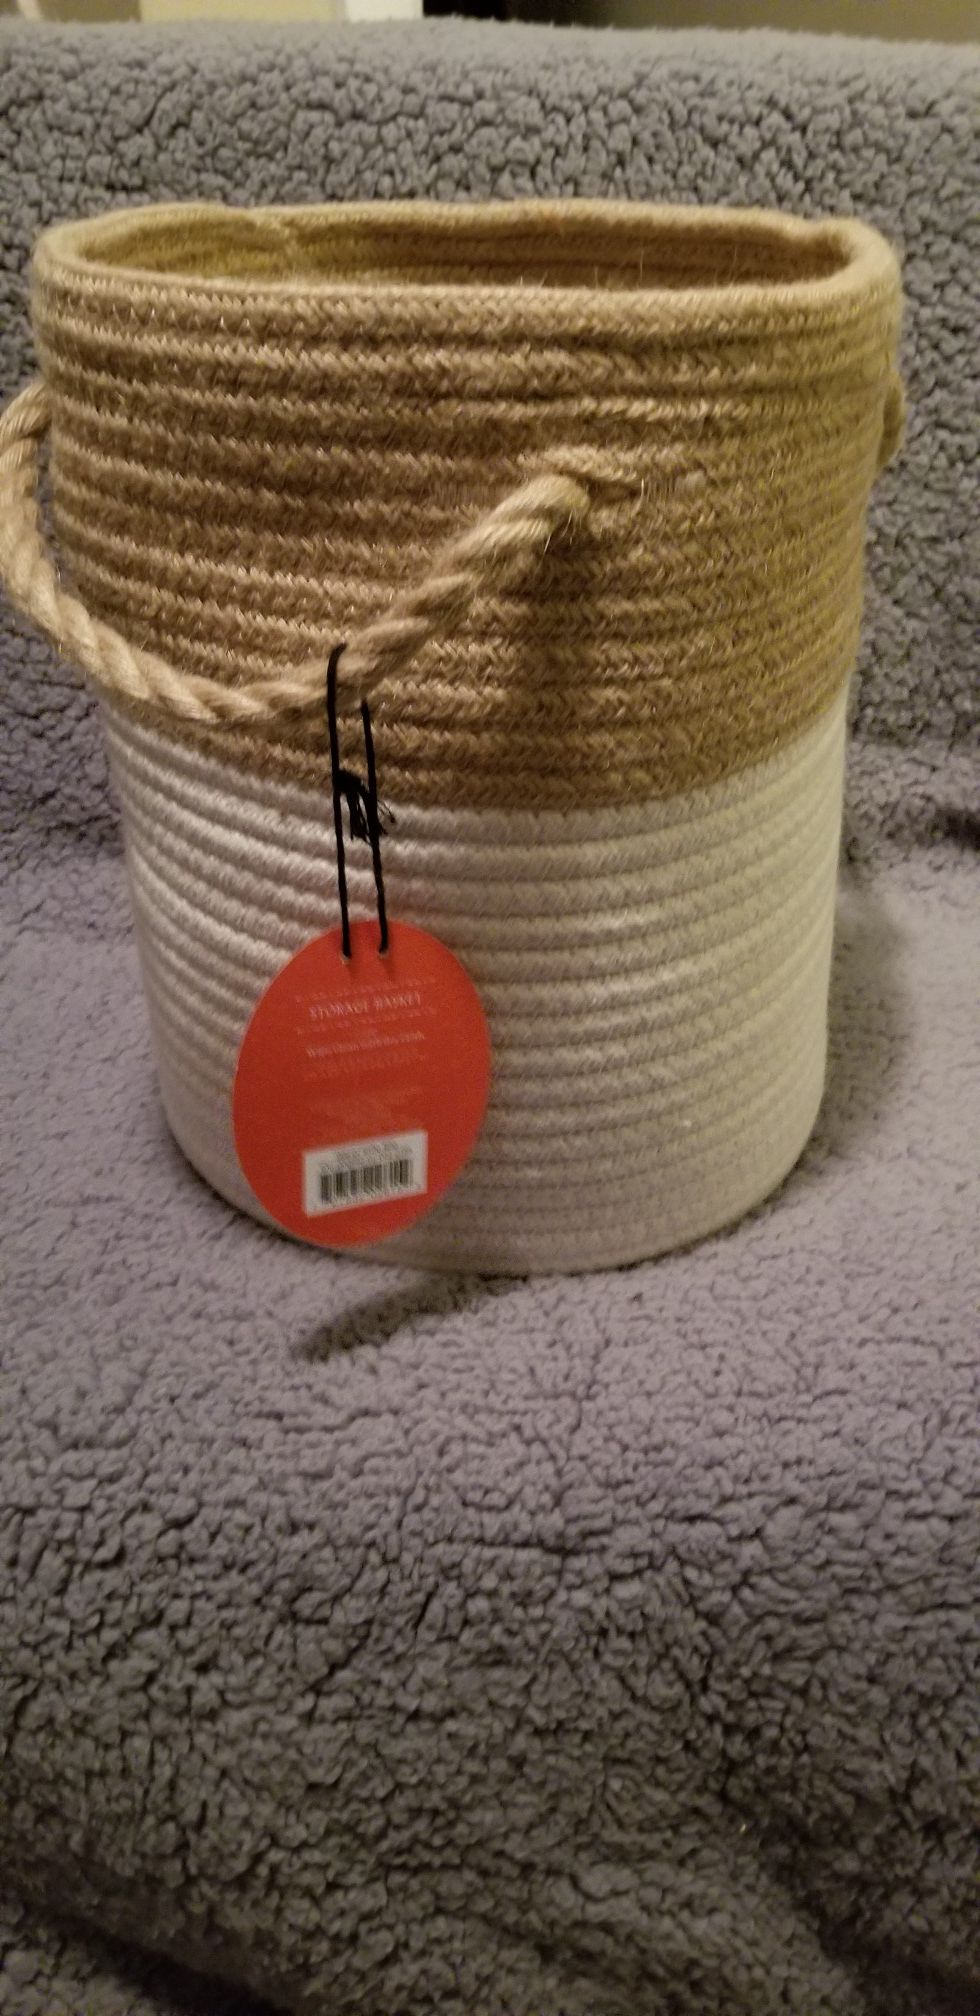 Coiled Rope Basket White - Opalhouse™